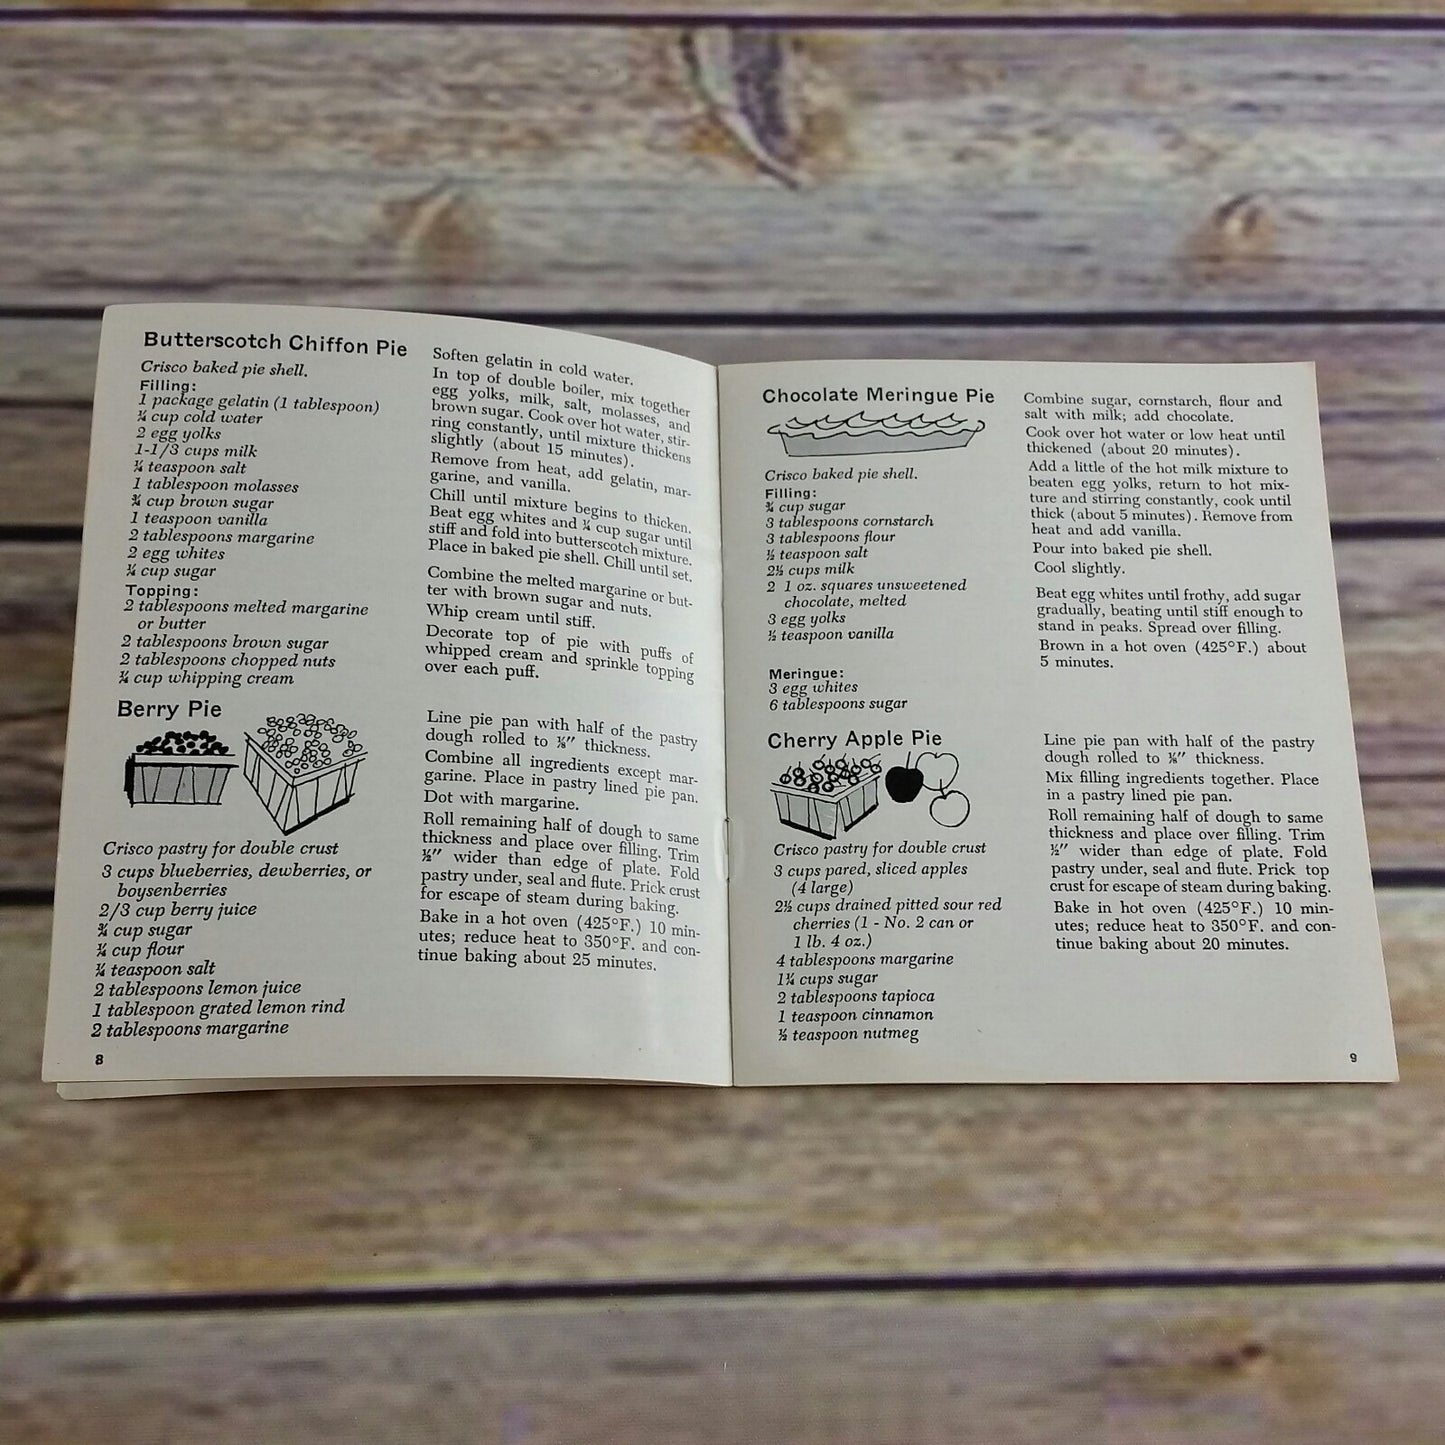 Vintage Cookbook Crisco Promo Easy as Pie Recipes Booklet 1940s or 1950s - At Grandma's Table